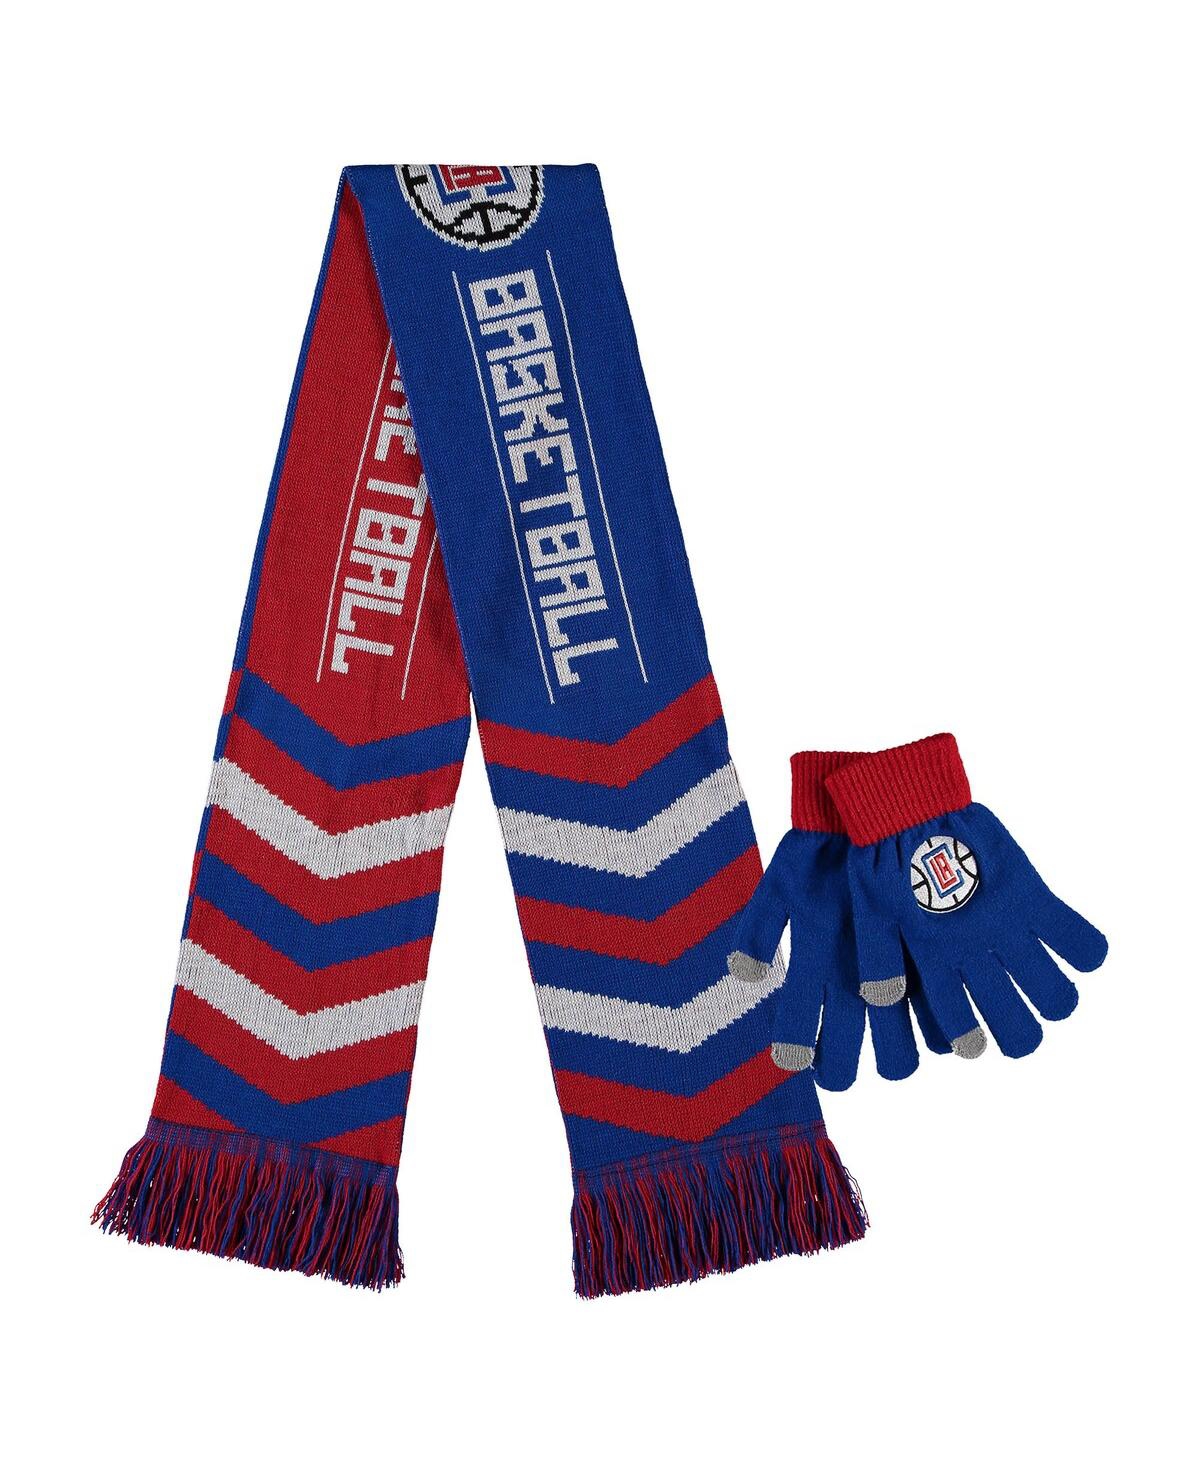 Men's and Women's Foco Red La Clippers Glove and Scarf Combo Set - Red